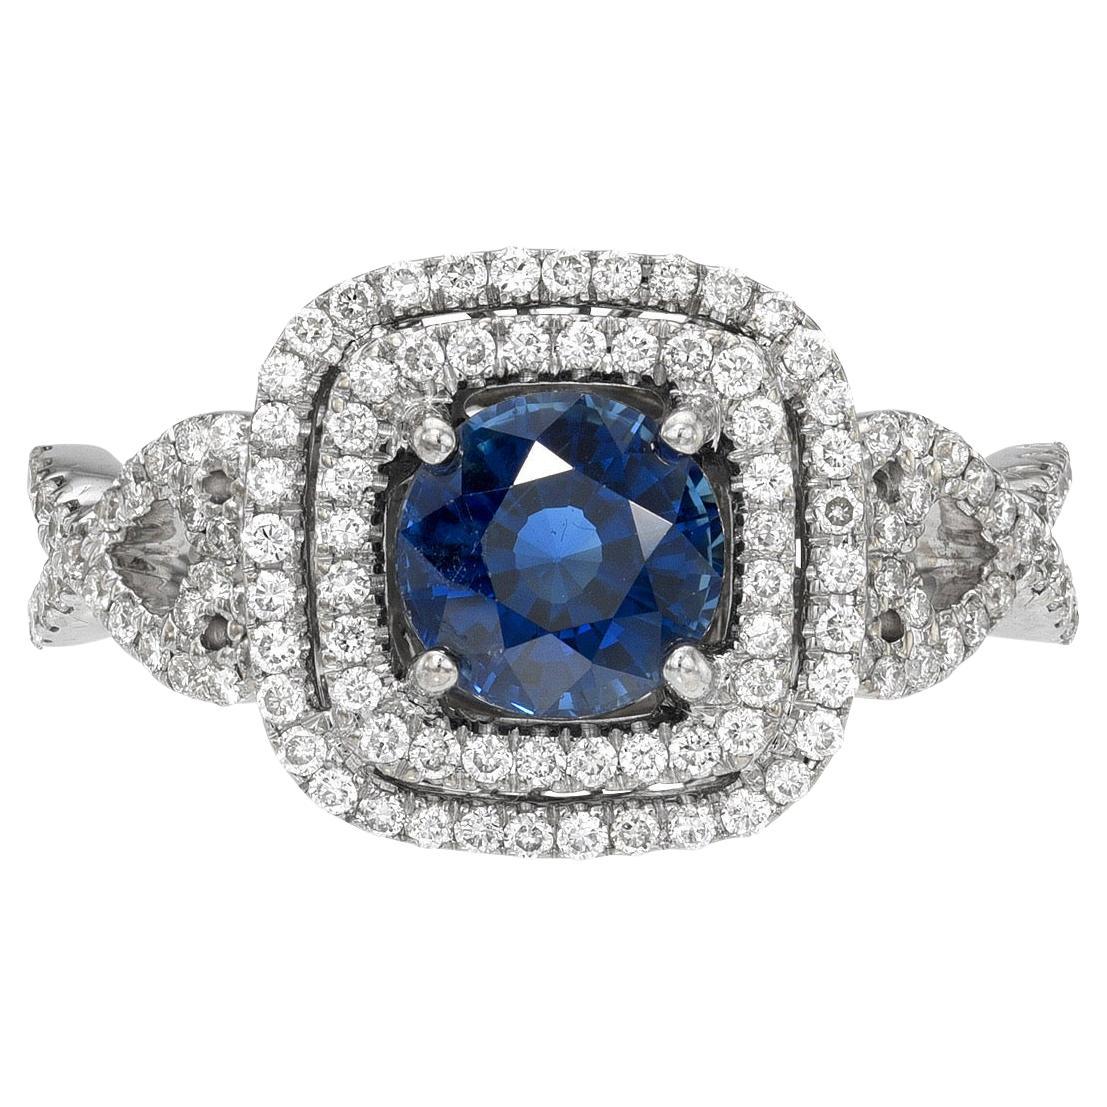 Blue Sapphire Ring 2.06 Carat Round For Sale